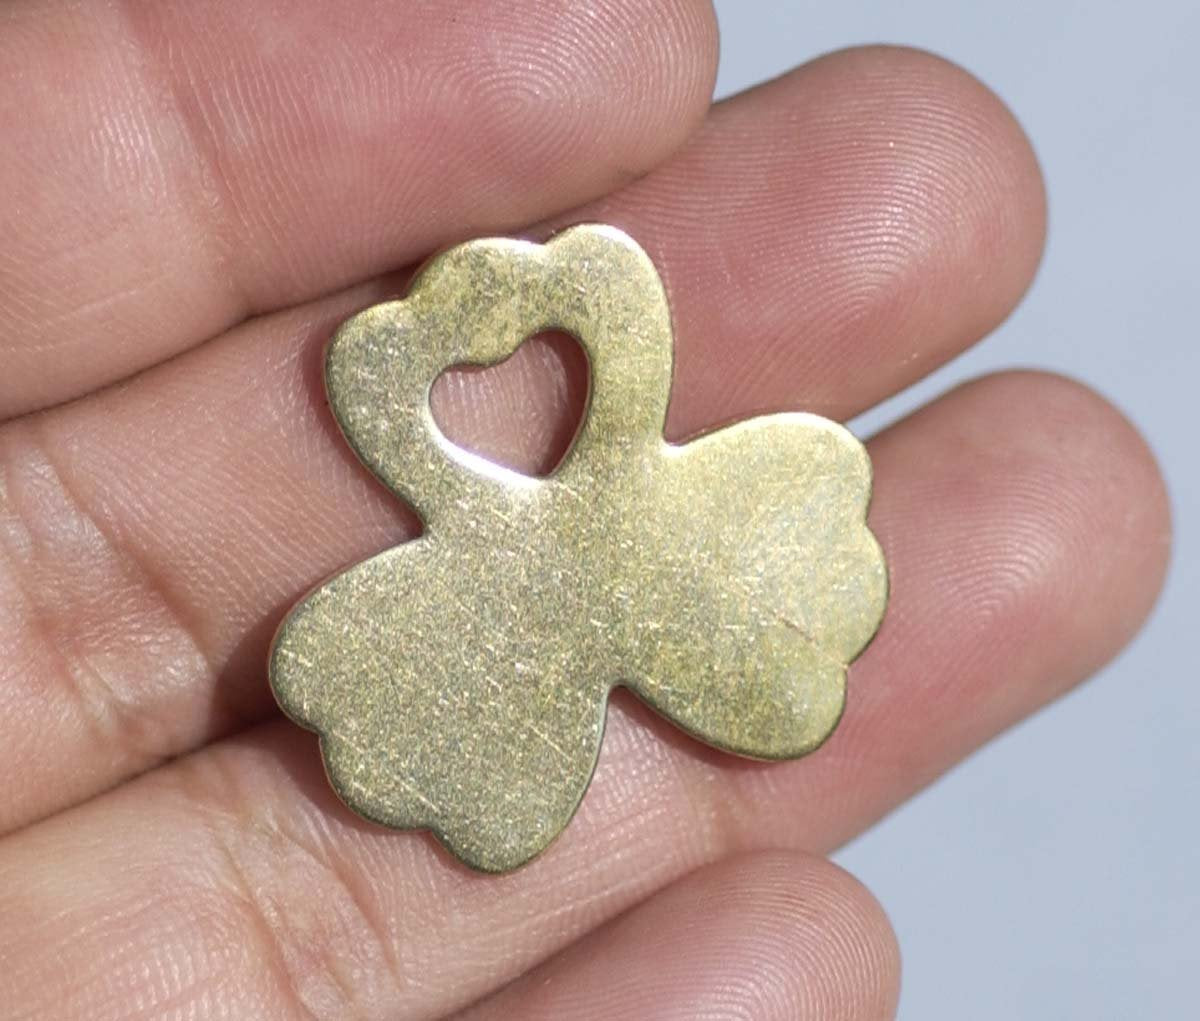 Brass, Copper, Bronze or Nickel Silver Clover Flower with Heart 25mm 22g Cutout for Blanks Metalworking Stamping Texturing Blank-6 pieces